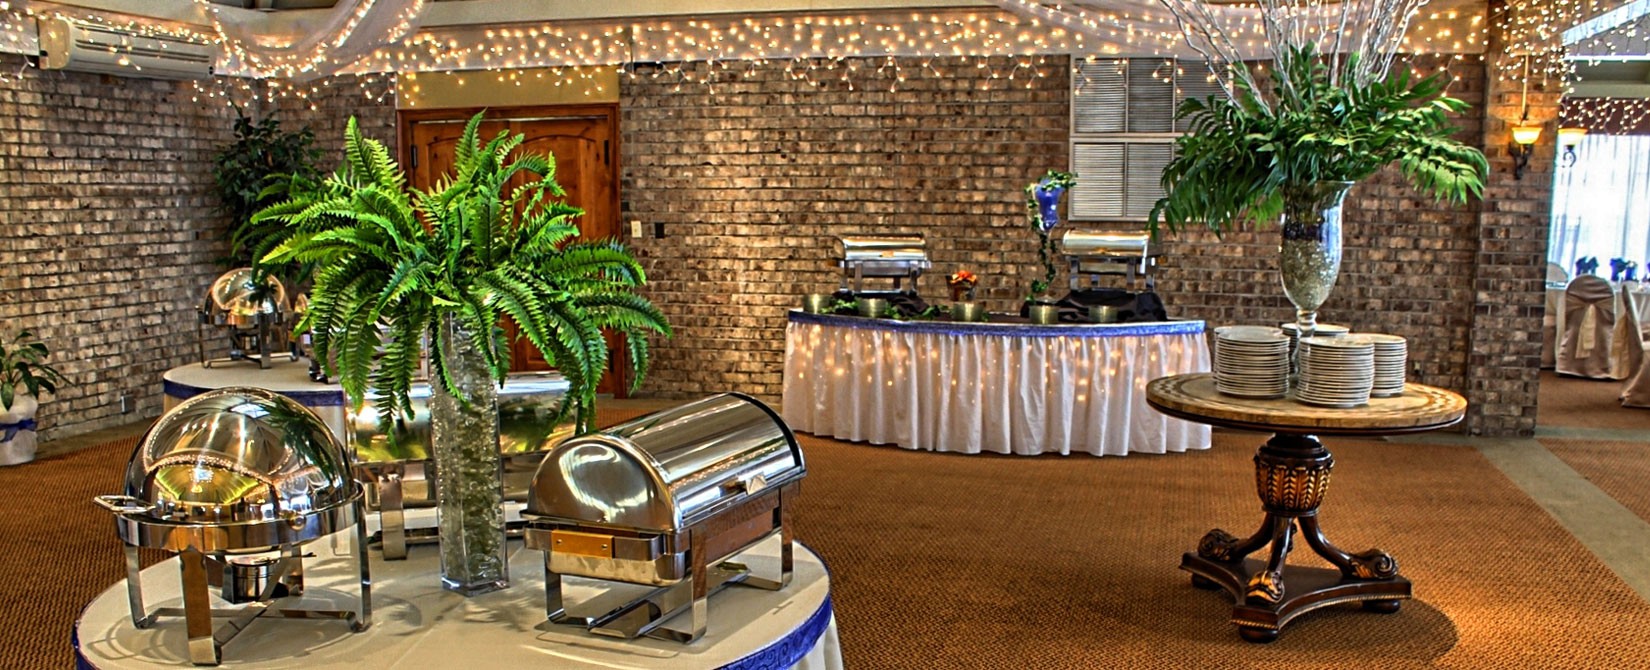 Banquet room at Caravelle Resort set up with plates and silver chafing dishes